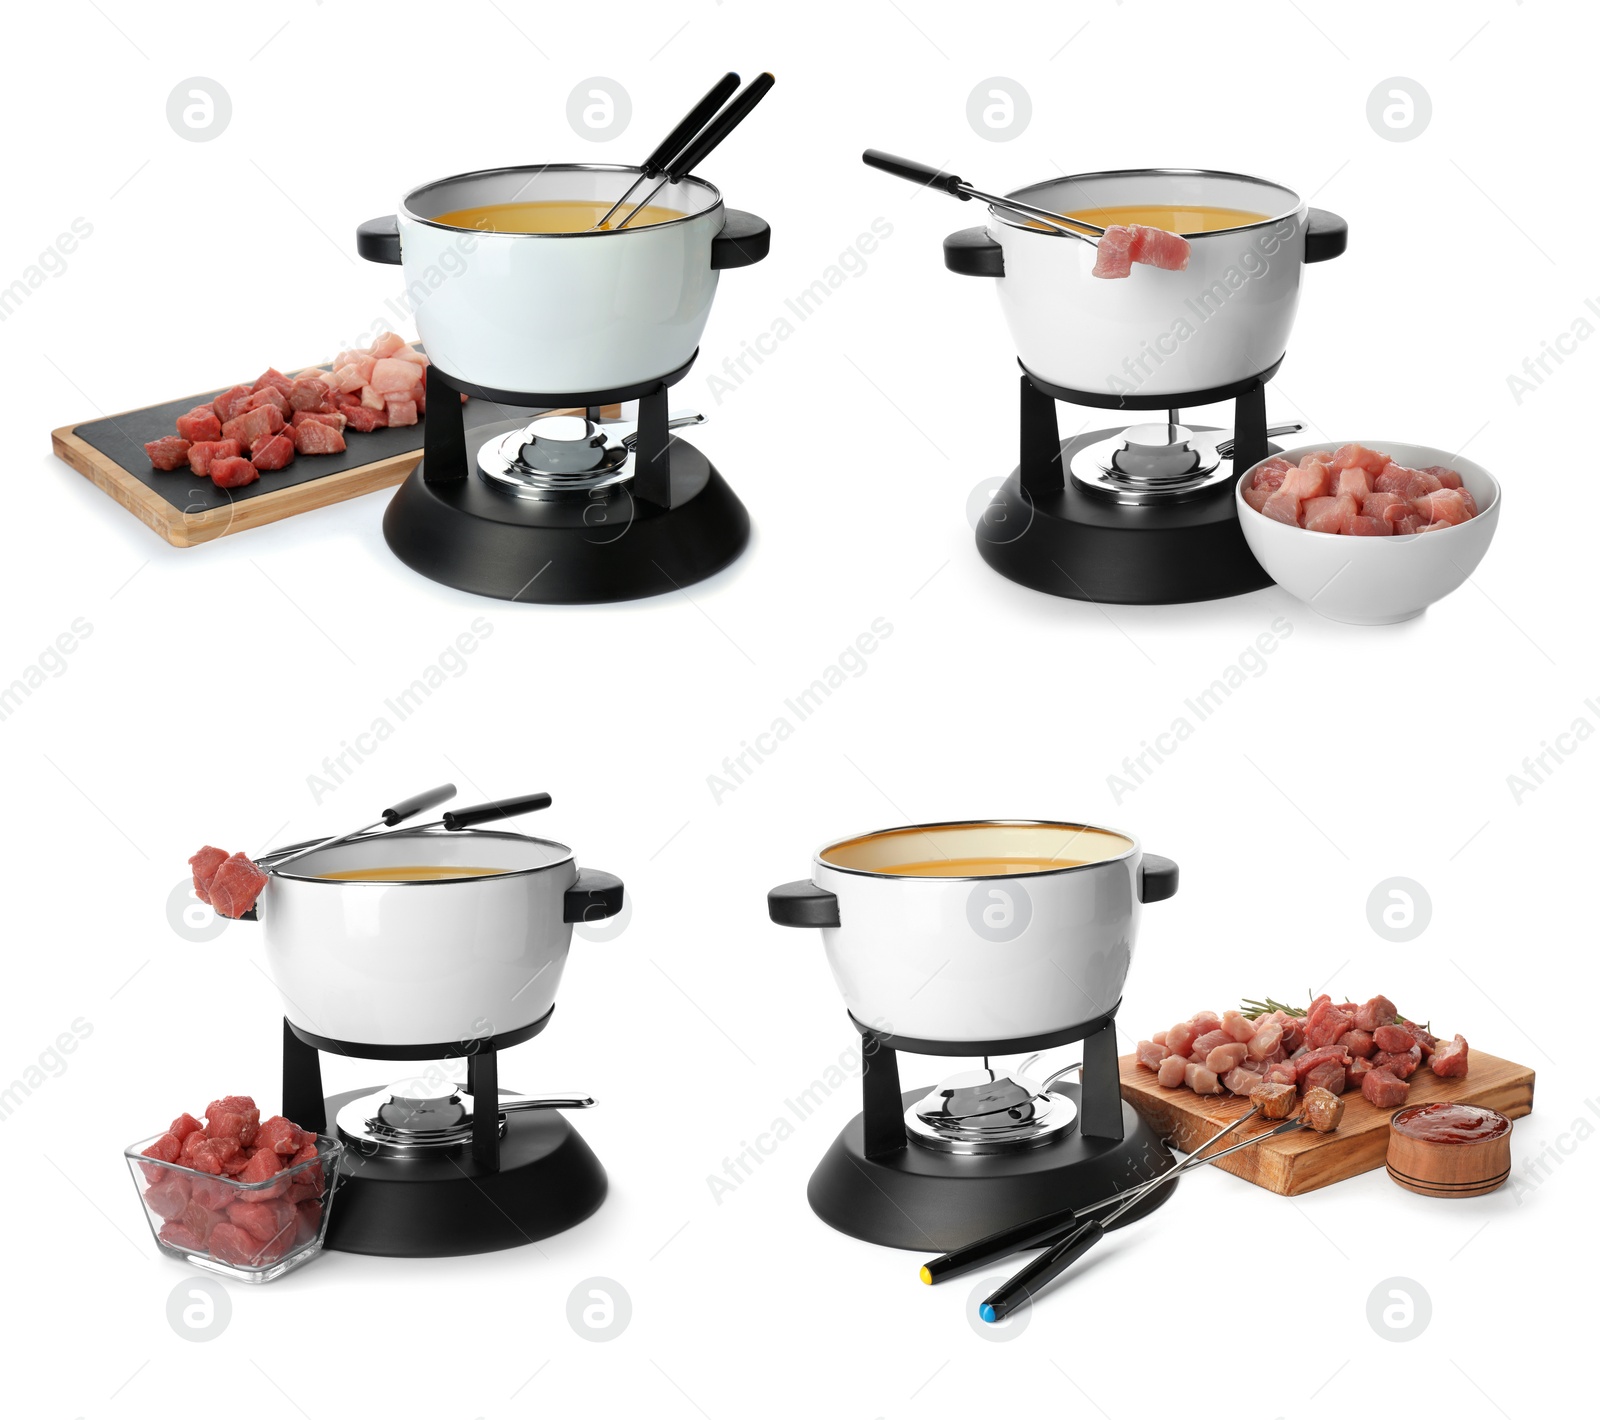 Image of Set with fondue pots and meat on white background